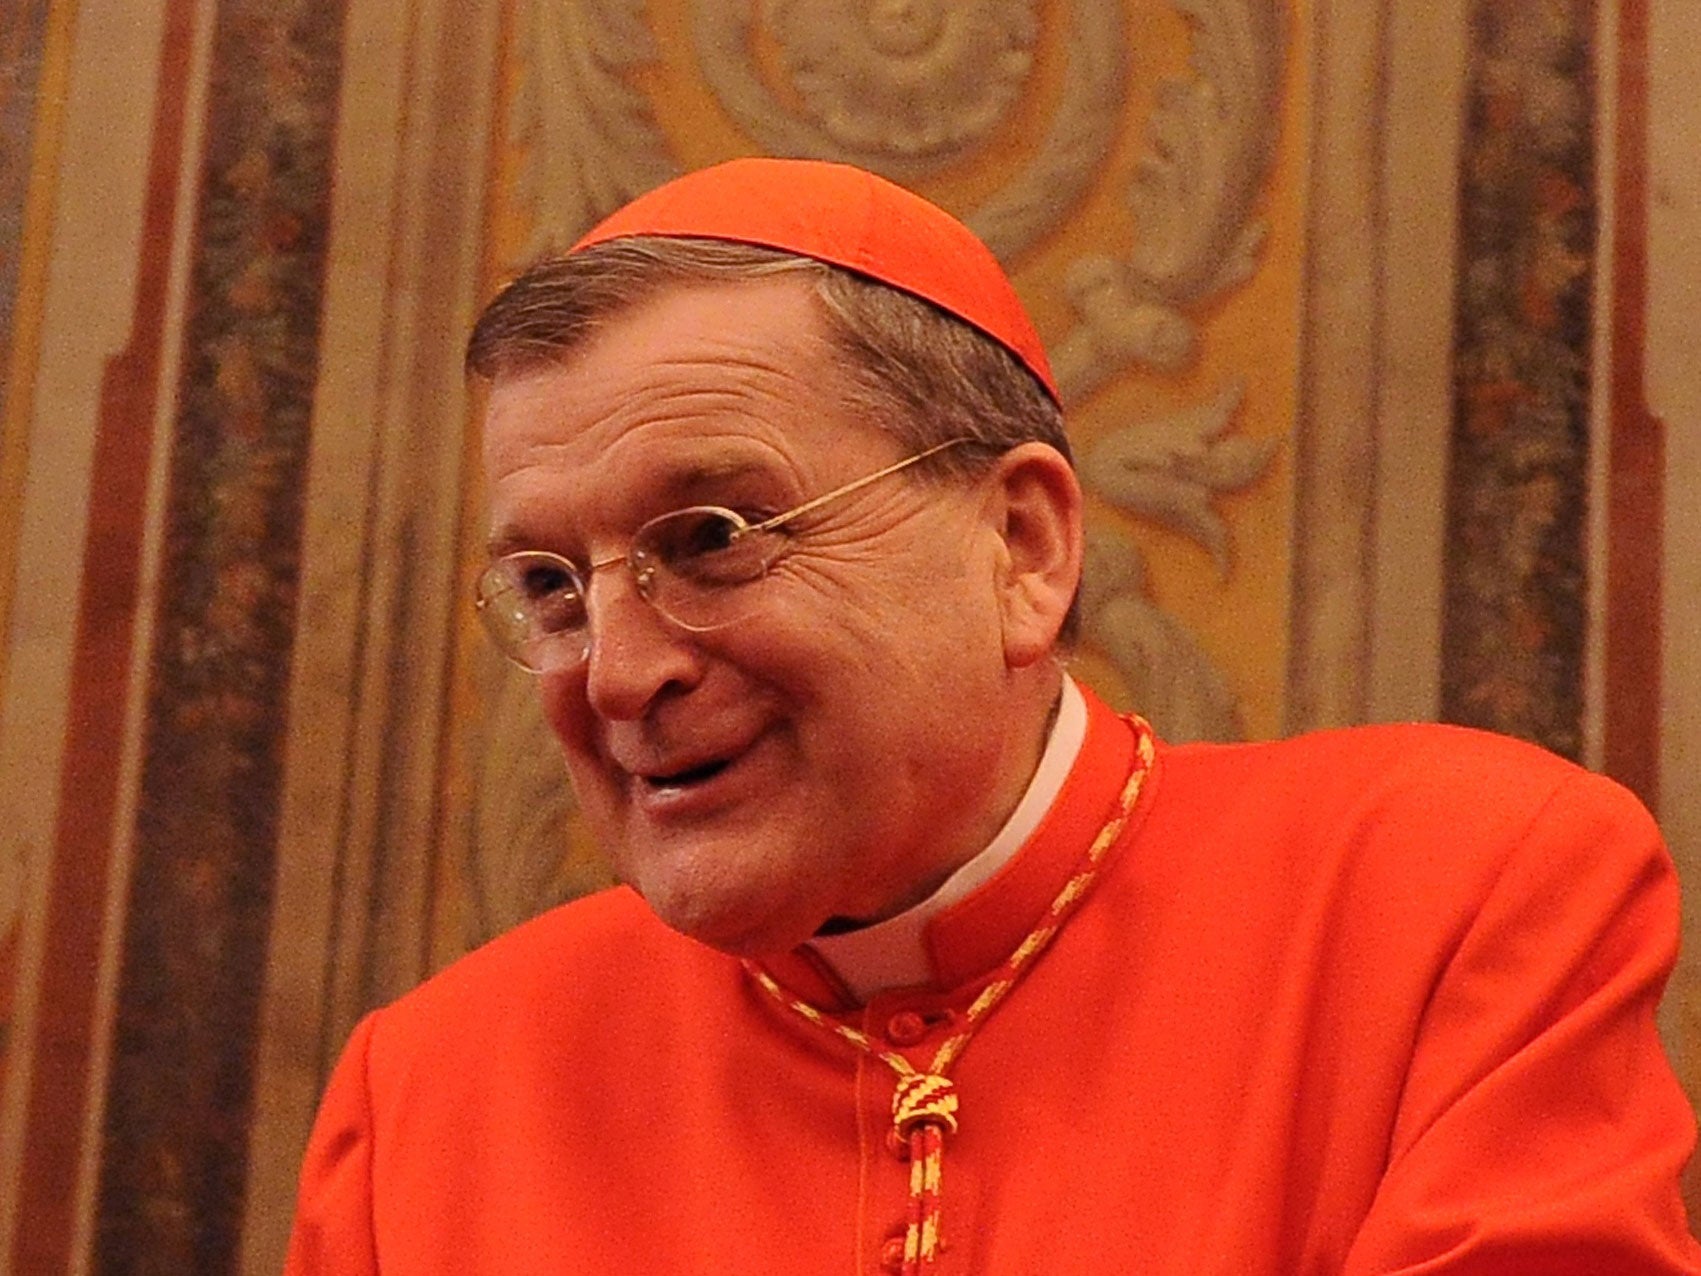 Cardinal Raymond Burke, who tested positive for Covid-19, has been placed on a ventilator